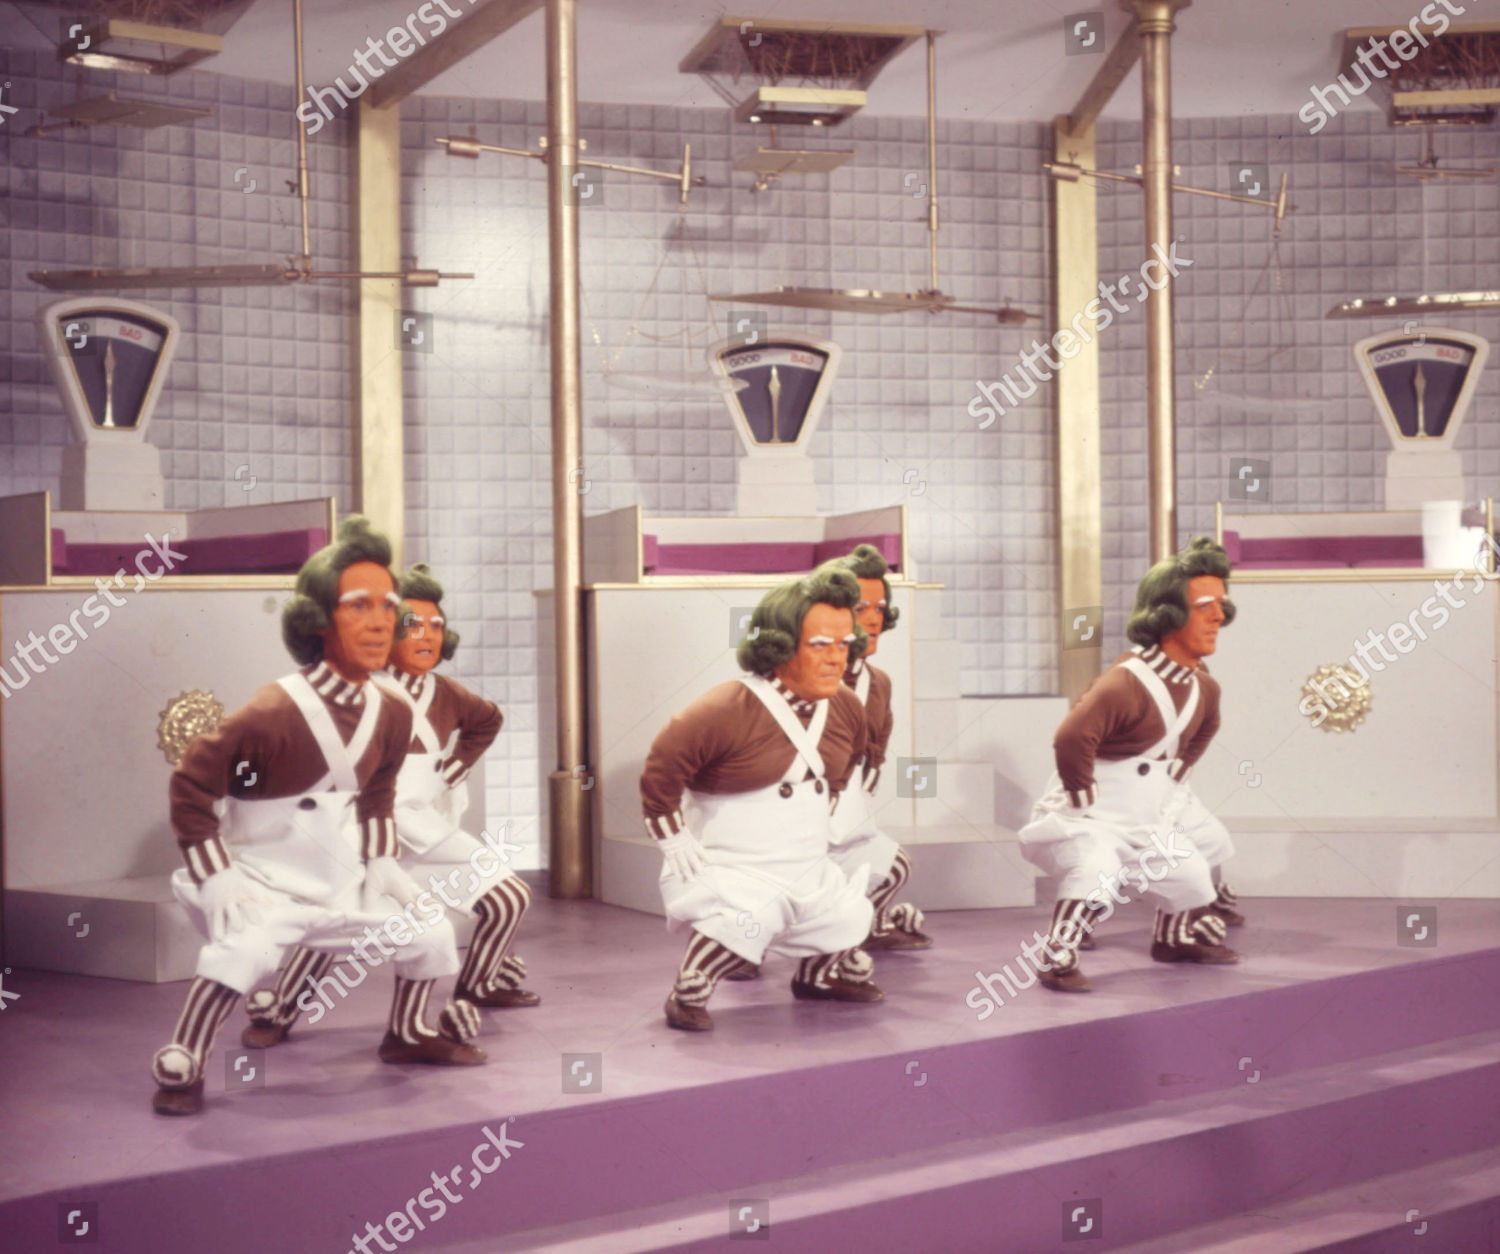 Willy Wonka Chocolate Factory 1971 Editorial Stock Photo - Stock Image |  Shutterstock Editorial